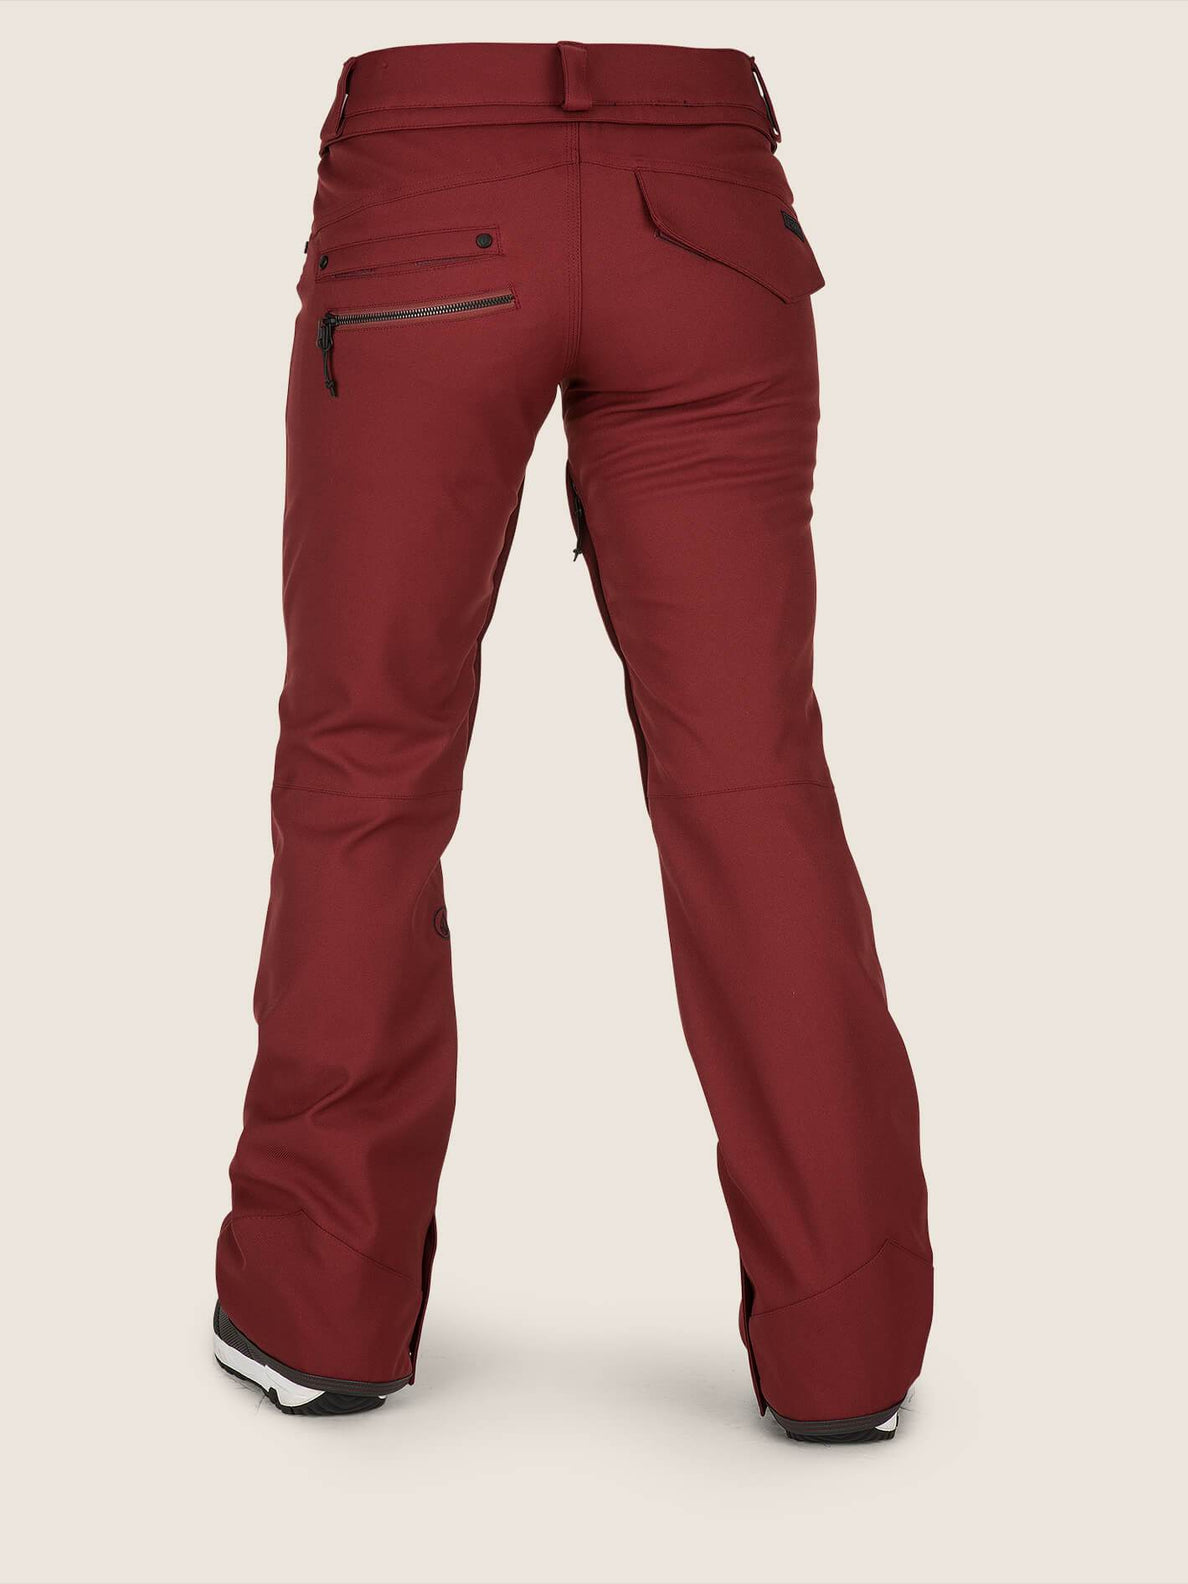 Species Stretch Pants - Burnt Red